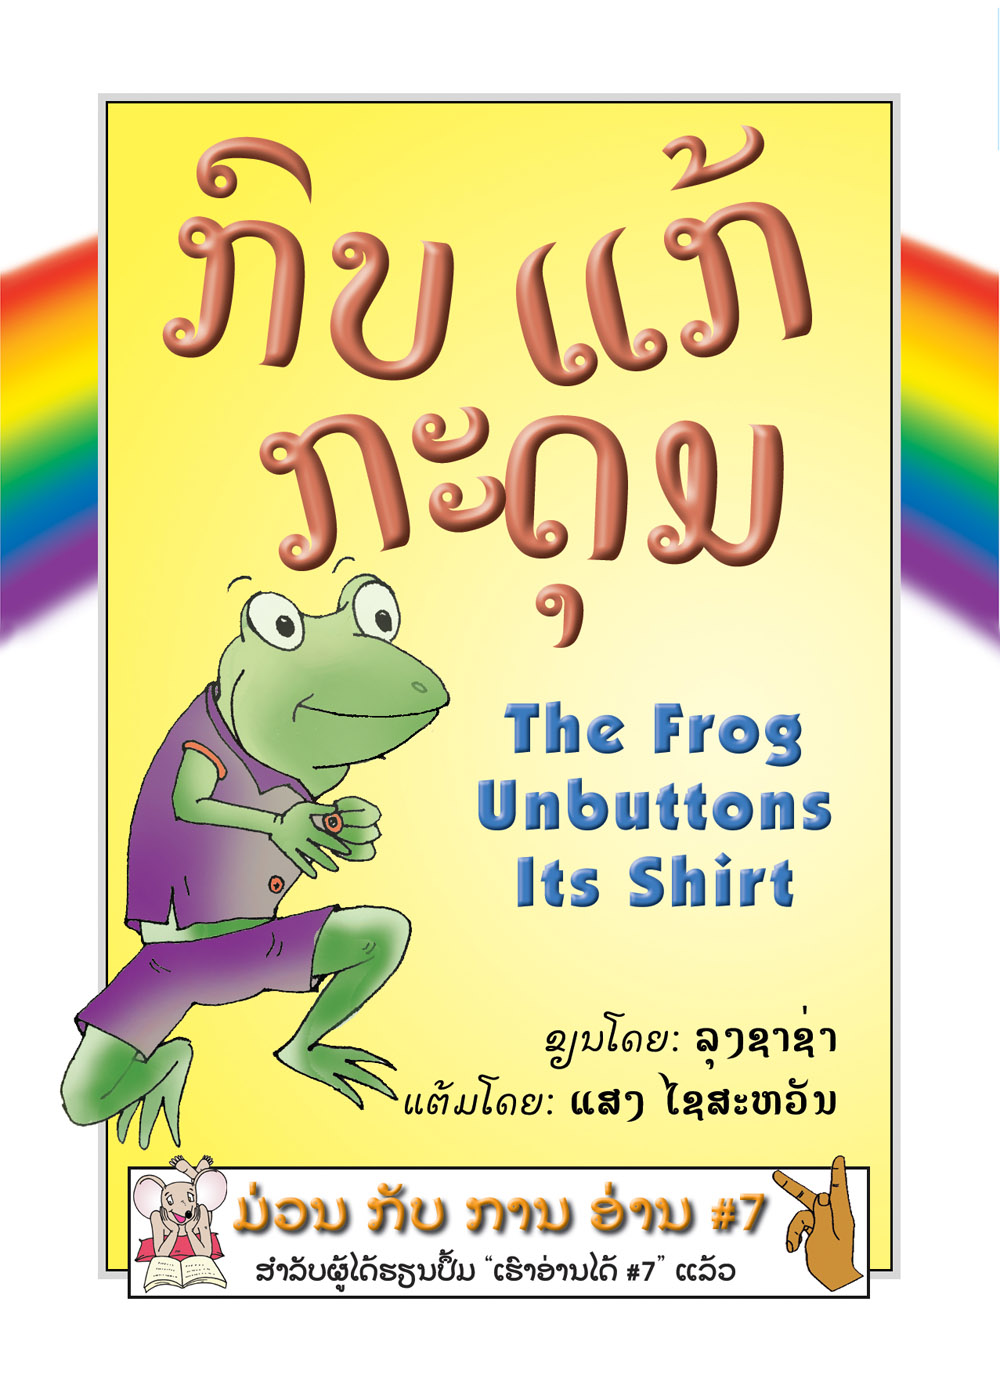 The Frog Unbuttons Its Shirt large book cover, published in Lao and English